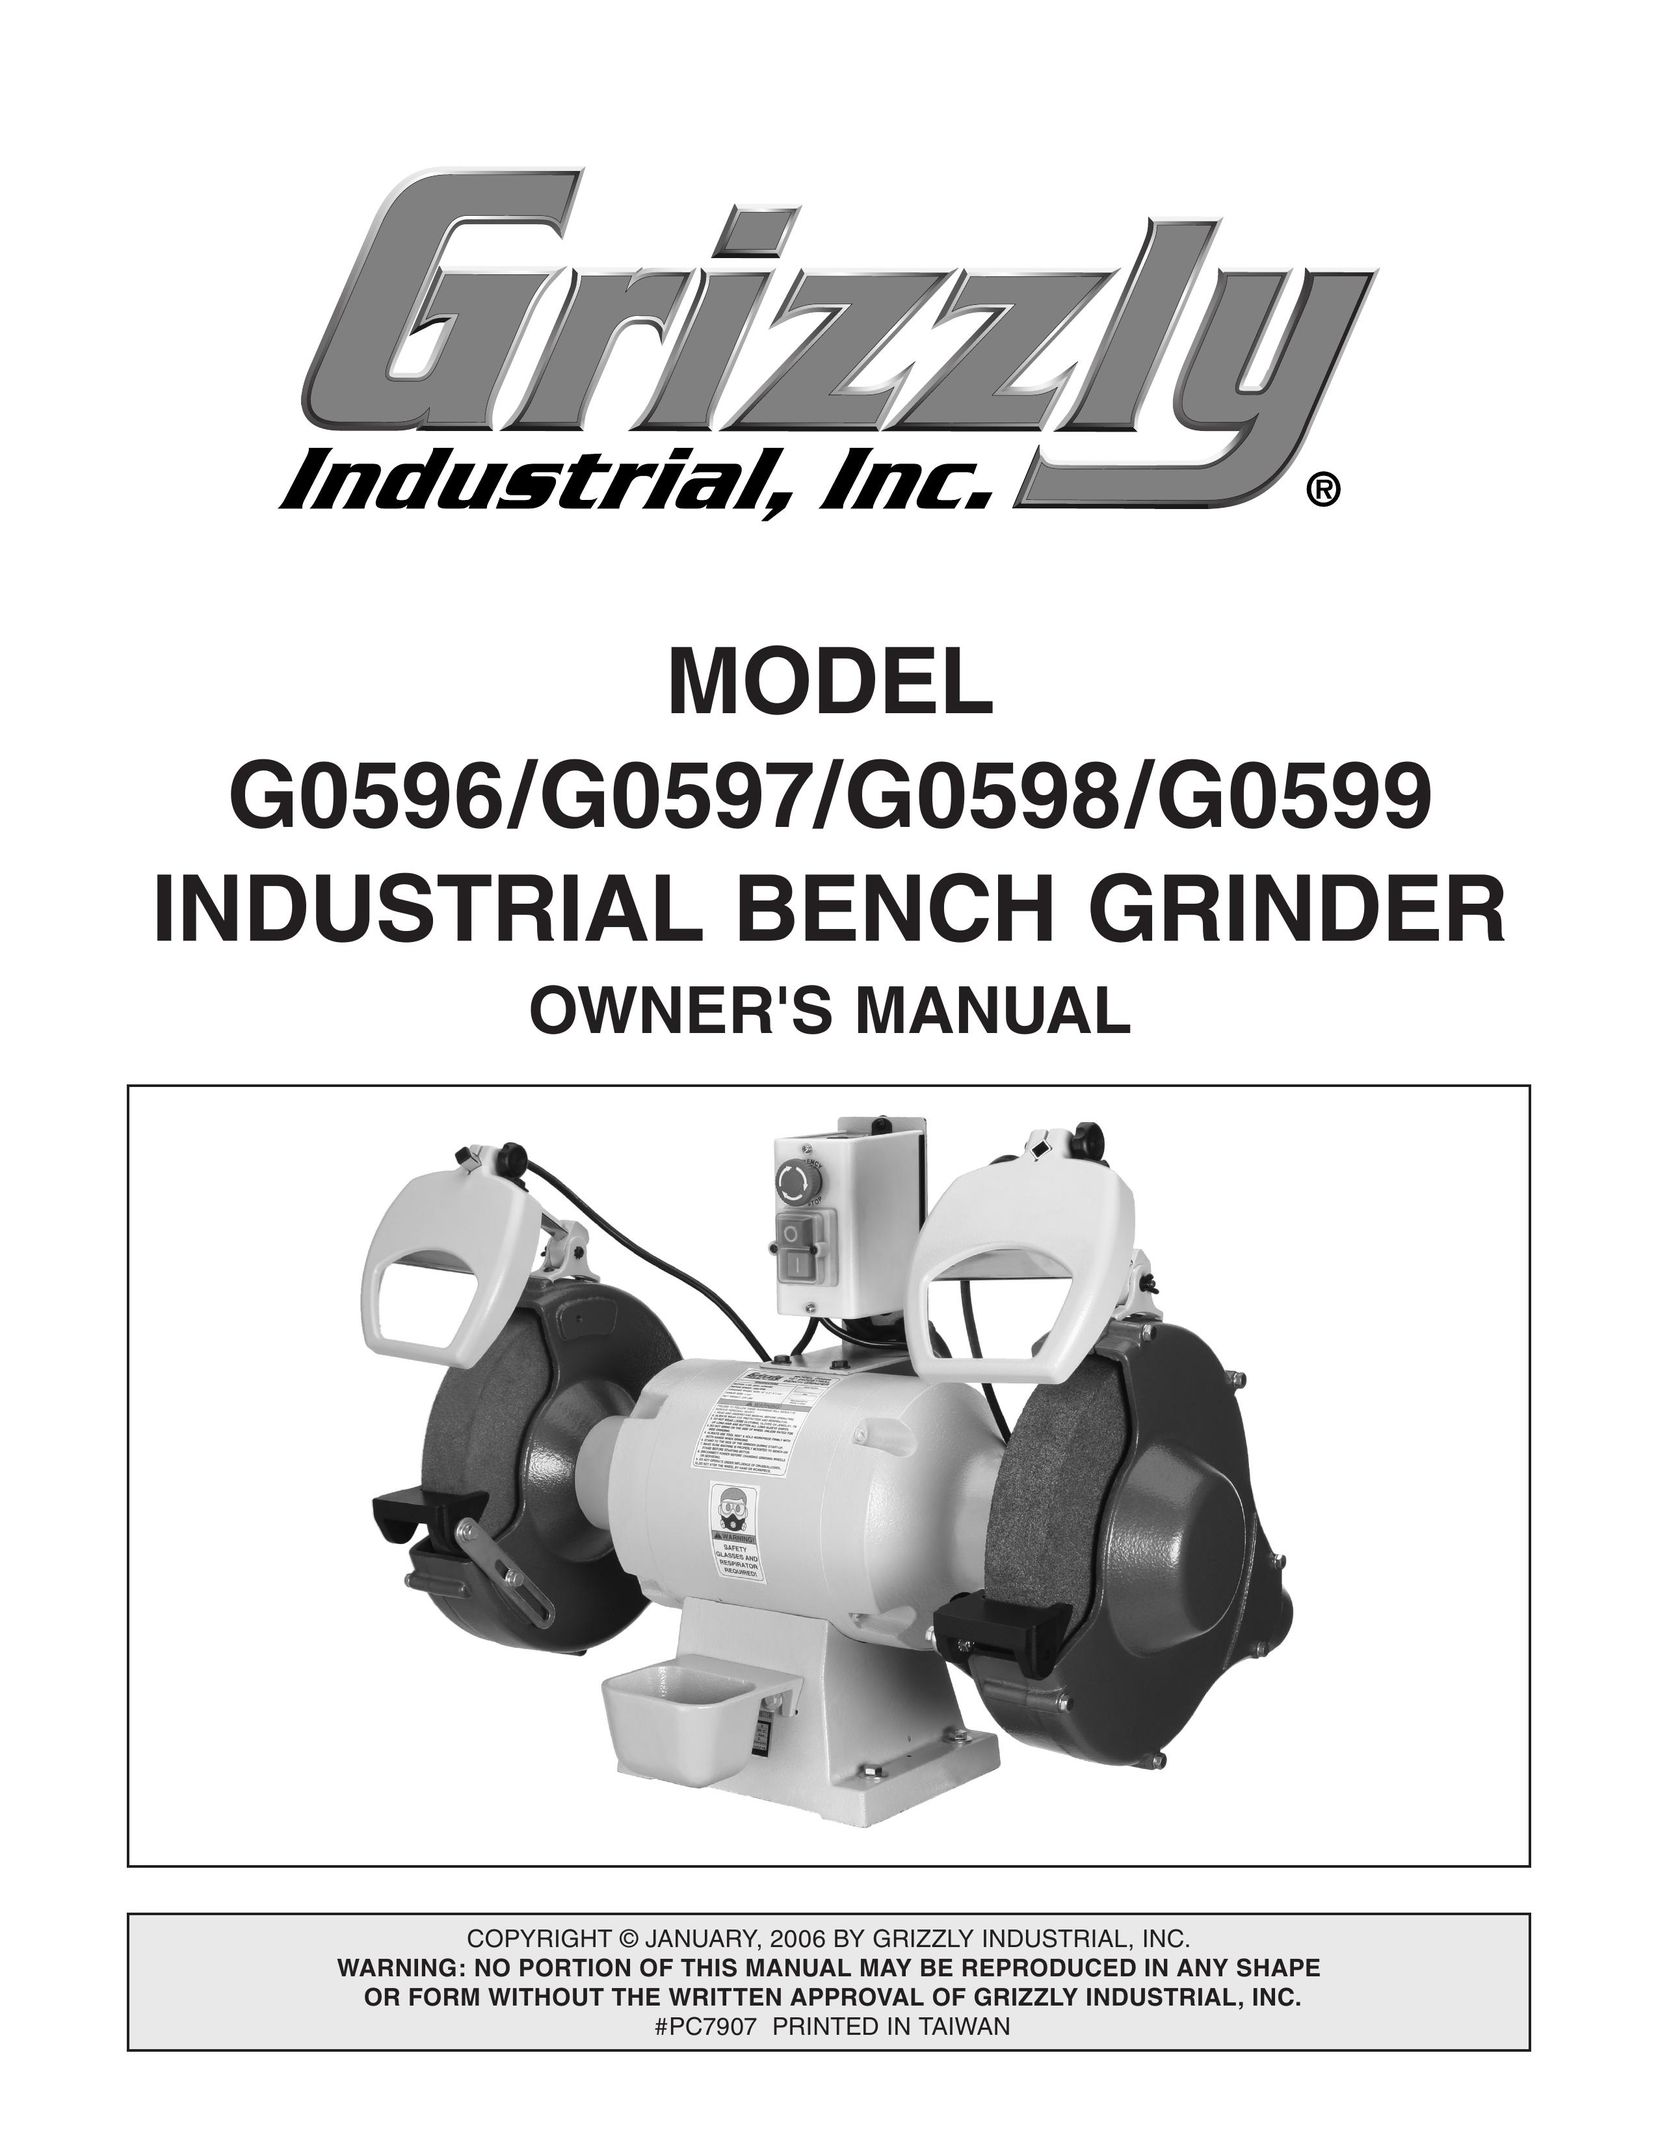 Grizzly G0598 Grinder User Manual